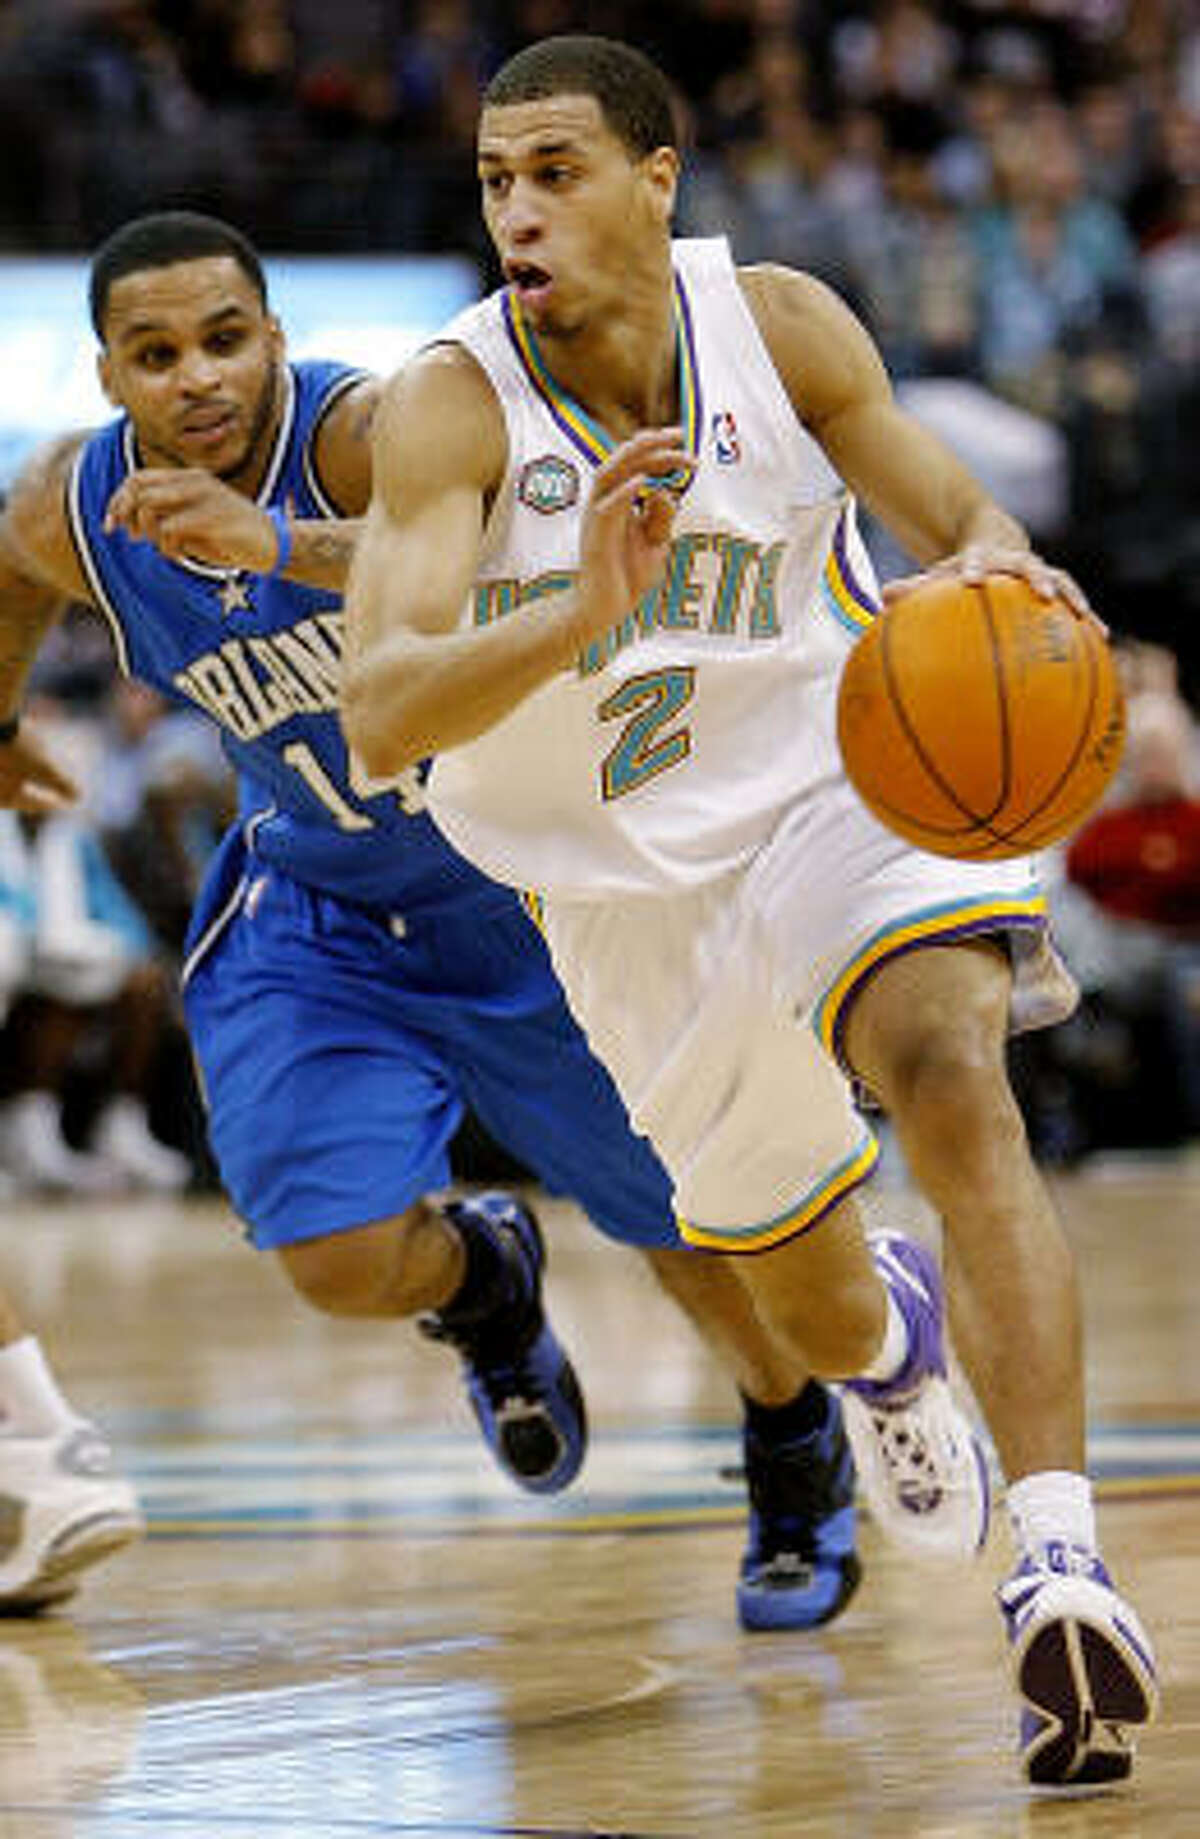 Jannero Pargo scored a season-high 25 points, 21 of them after halftime as the Hornets scraped past the Orlando Magic.